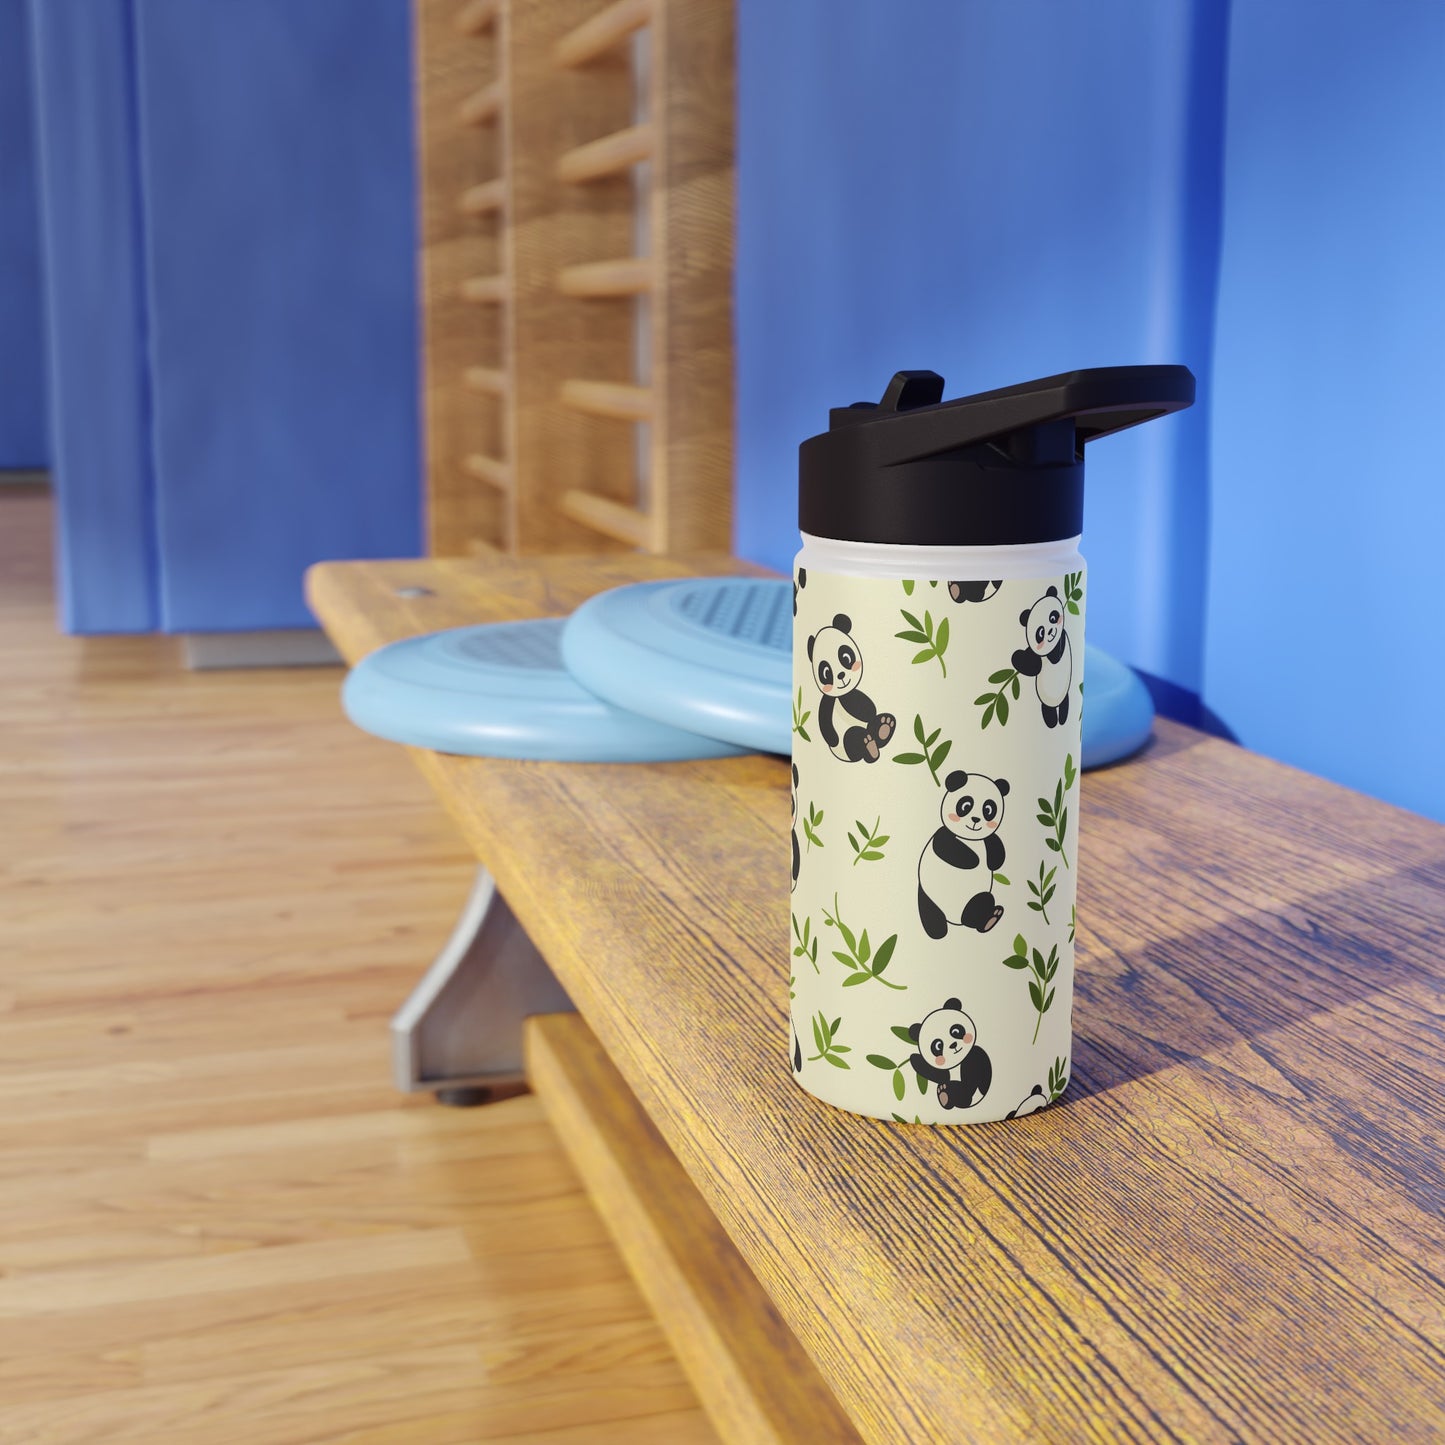 Insulated Water Bottle, 12oz, Cute Panda Bear Cubs - Double Walled Stainless Steel Thermos, Keeps Drinks Hot or Cold